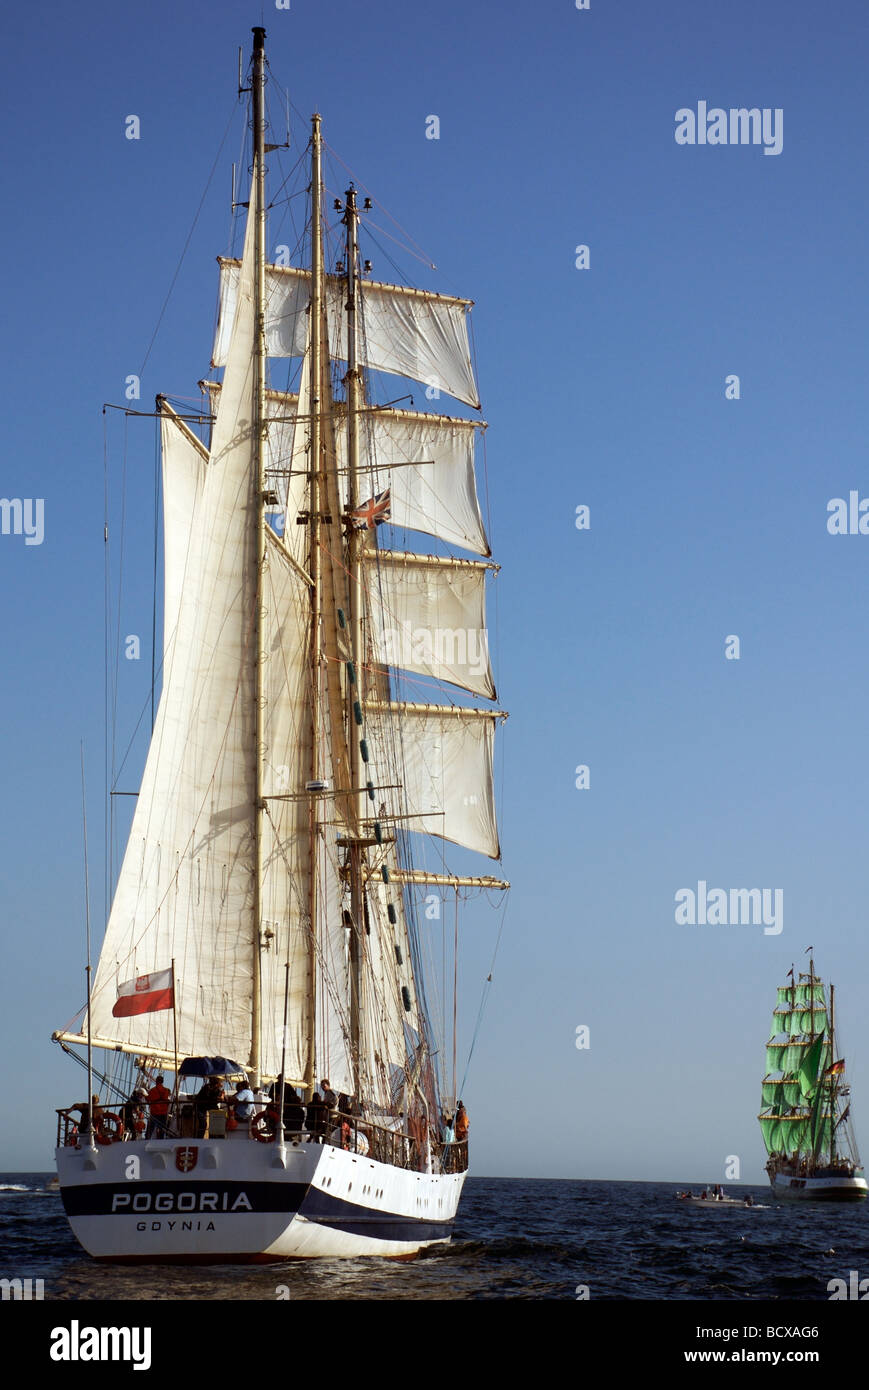 The Pogoria barquentine ship from Poland and Alexander Von Humboldt from Germany, Funchal 500 Tall Ships Regatta 2008, Falmouth Stock Photo